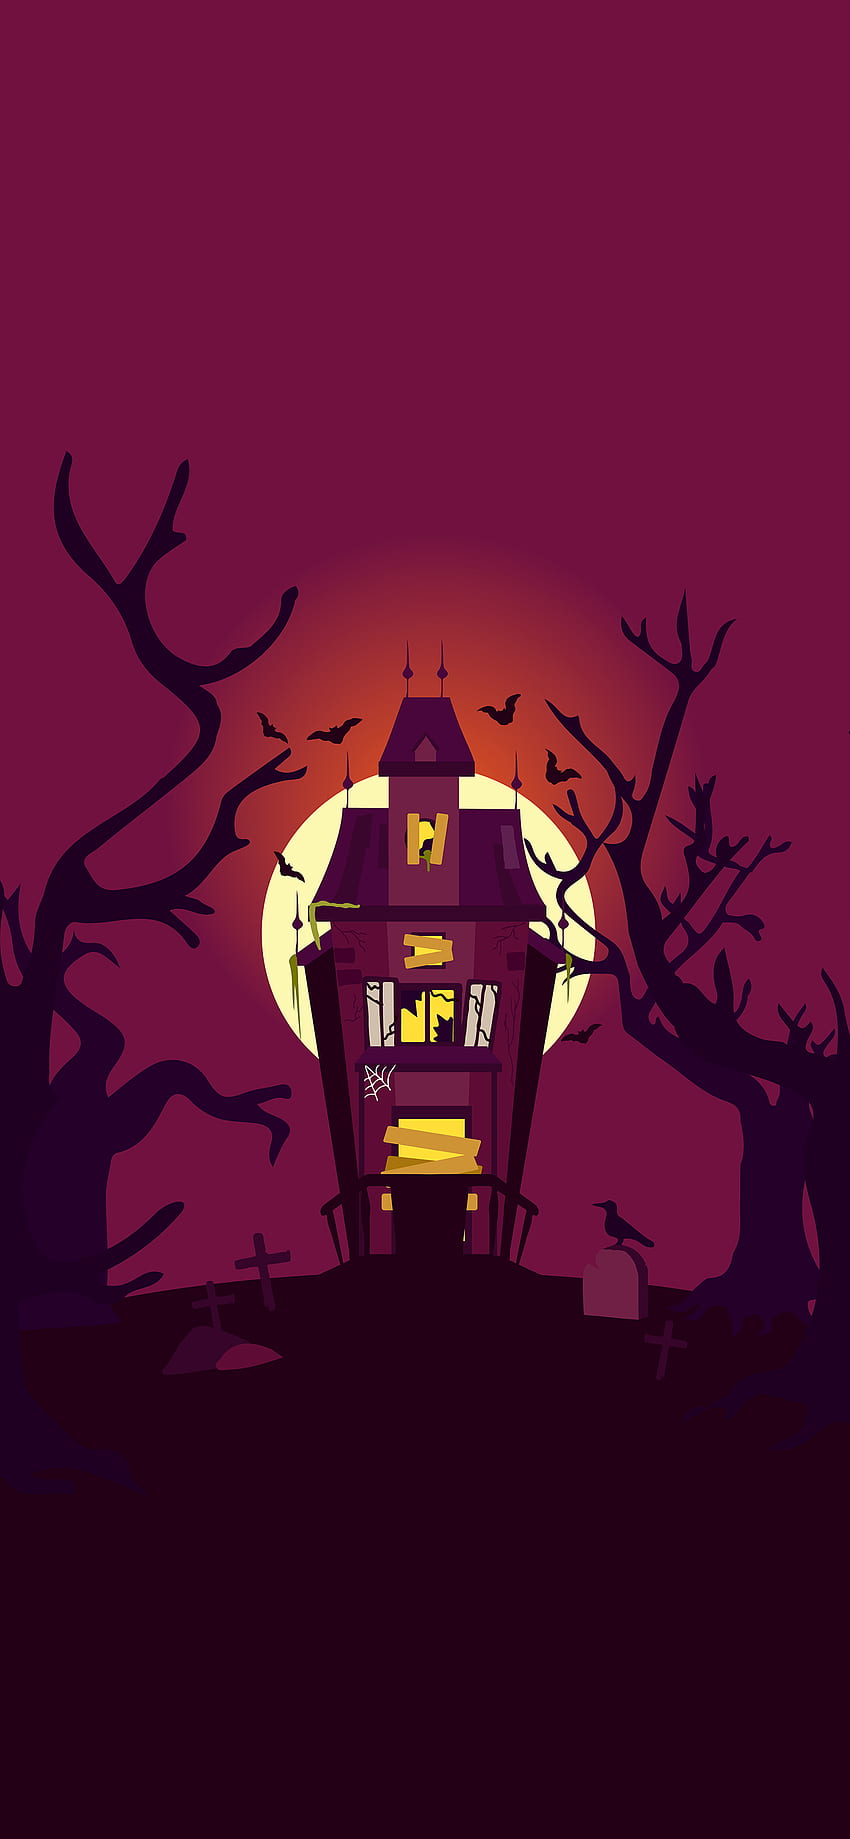 Funny, Spooky & Happy Halloween For iPhone (2020), Haunted House iPhone HD phone wallpaper